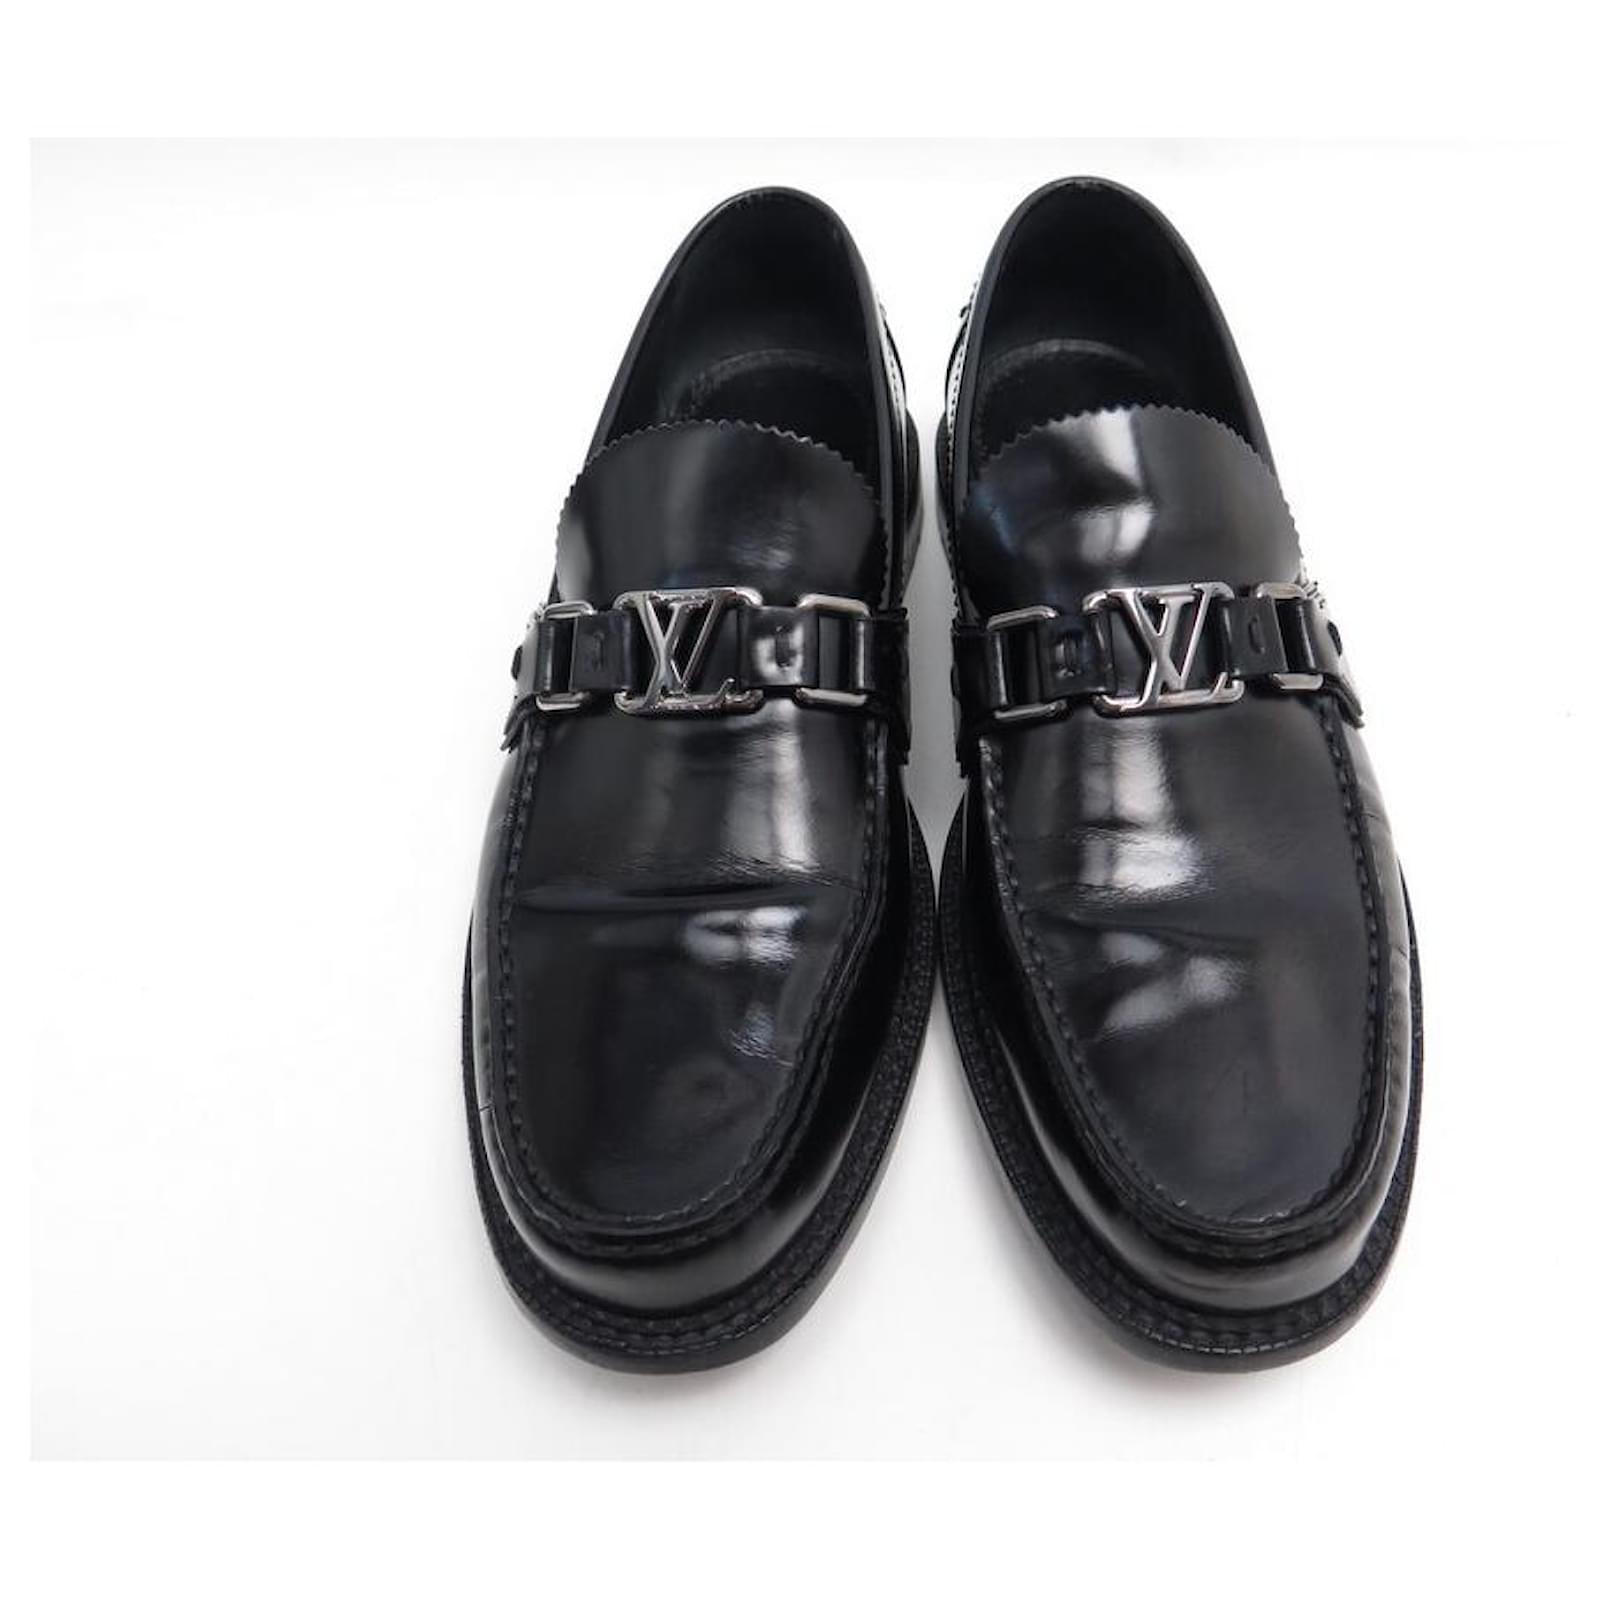 LOUIS VUITTON LOAFERS 6 40 BLACK LEATHER LOAFERS SHOES ref.357817